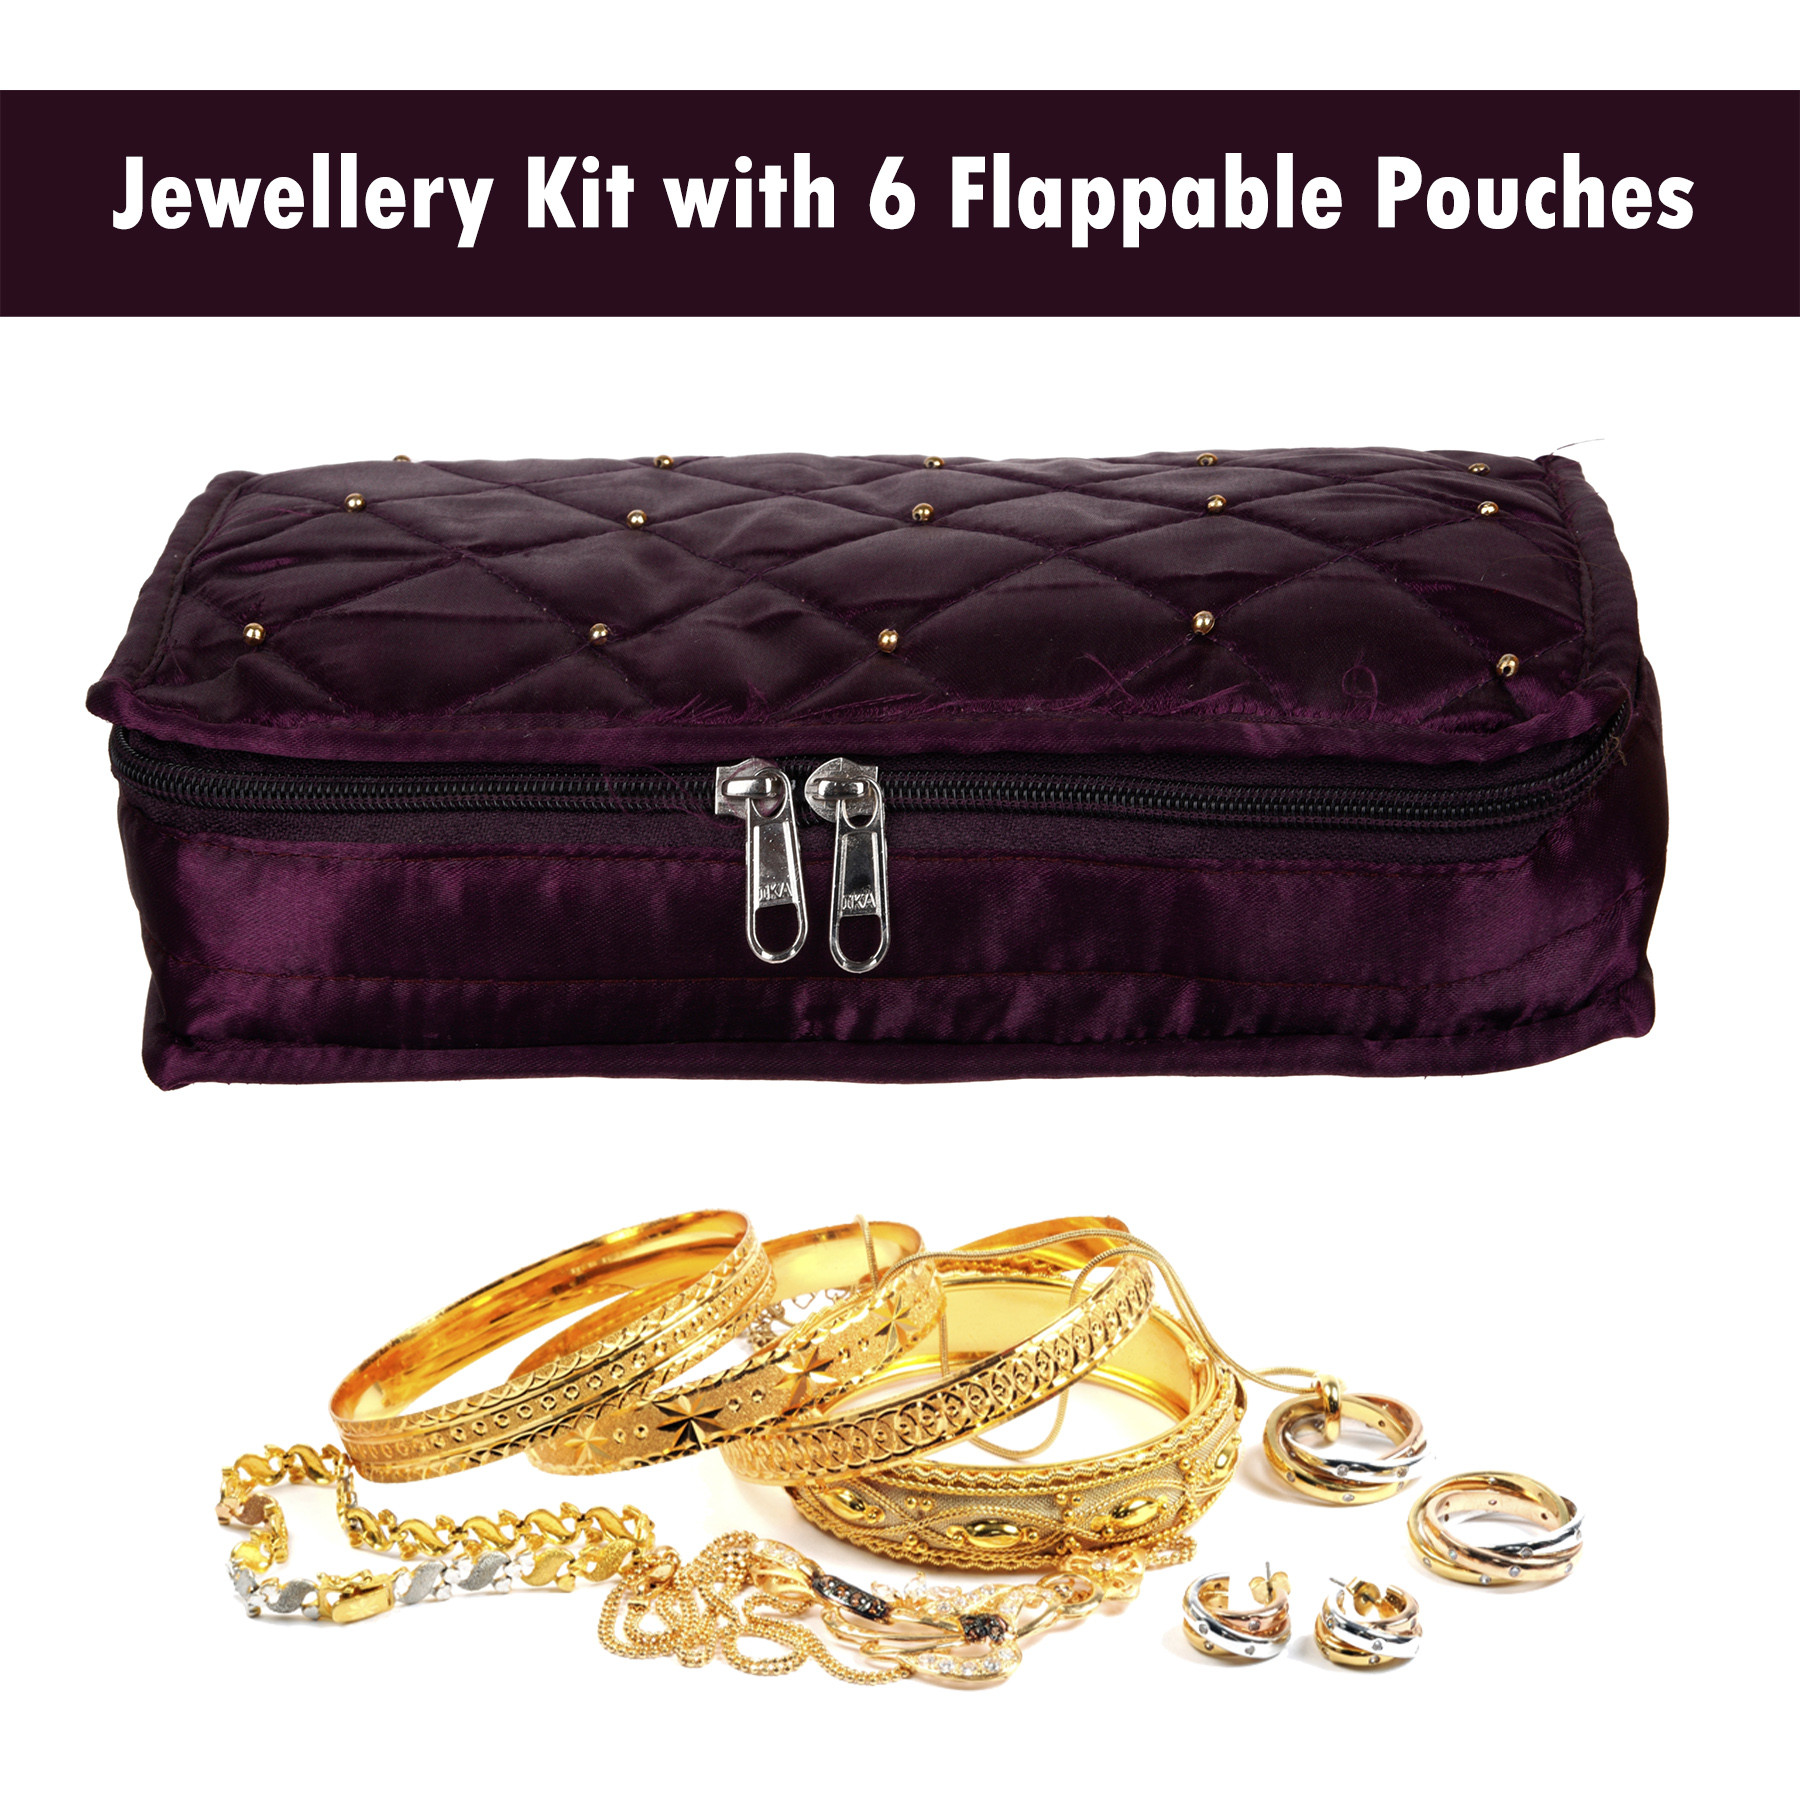 Kuber Industries Jewellery Kit | Satin Jewellery Storage Kit | Moti Beads Jewellery Kit | Cosmetic Kit with 6 Flappable Pouches | Travel Kit for Necklace | Rings | Bracelet | Wine